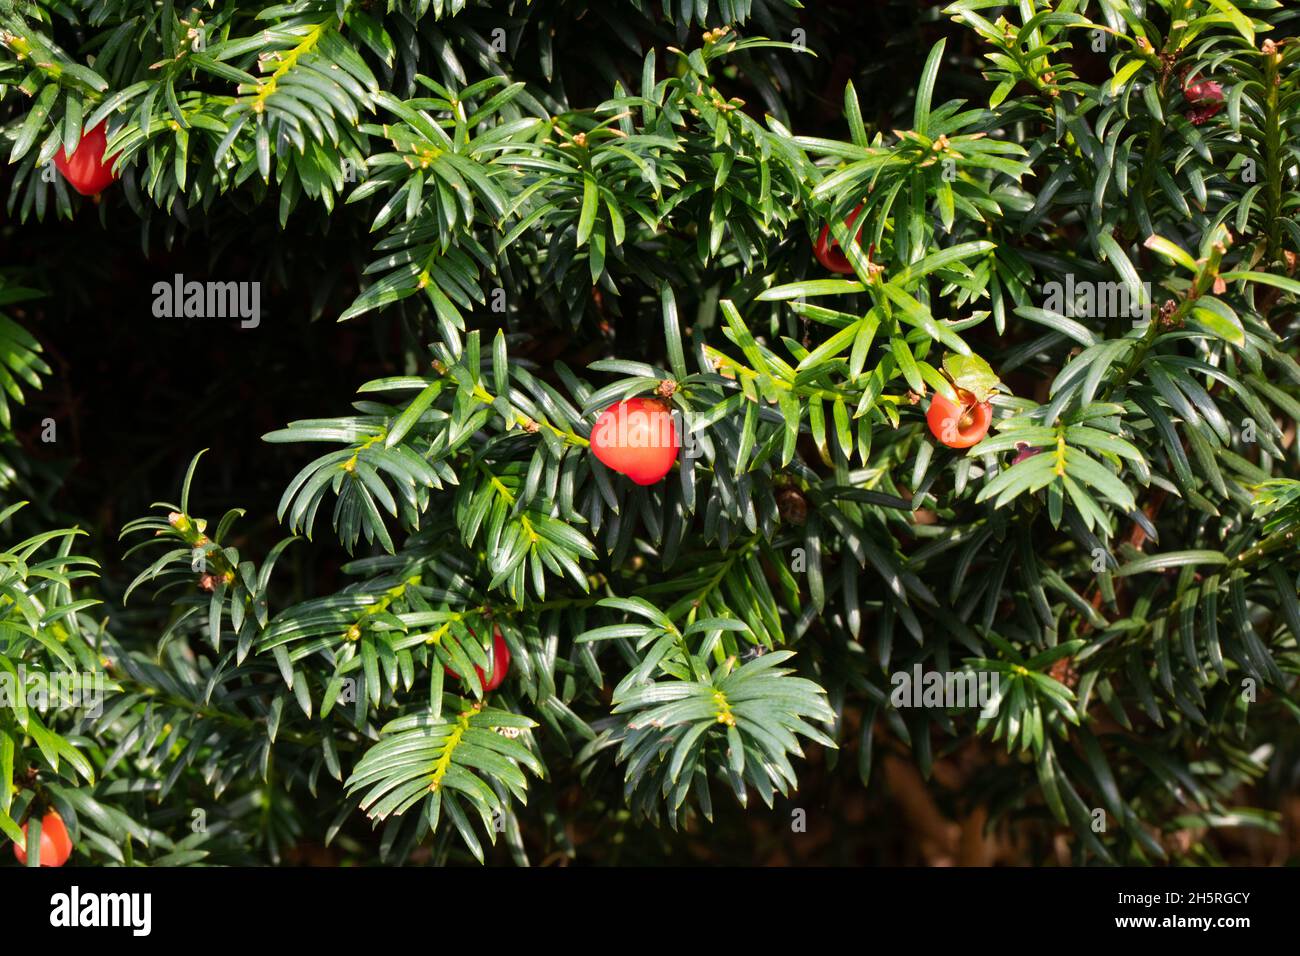 Yew (Taxus baccata) Tree Hedge fruit, berry, berries and leaves poisonous. except to some birds. Be aware. Stock Photo